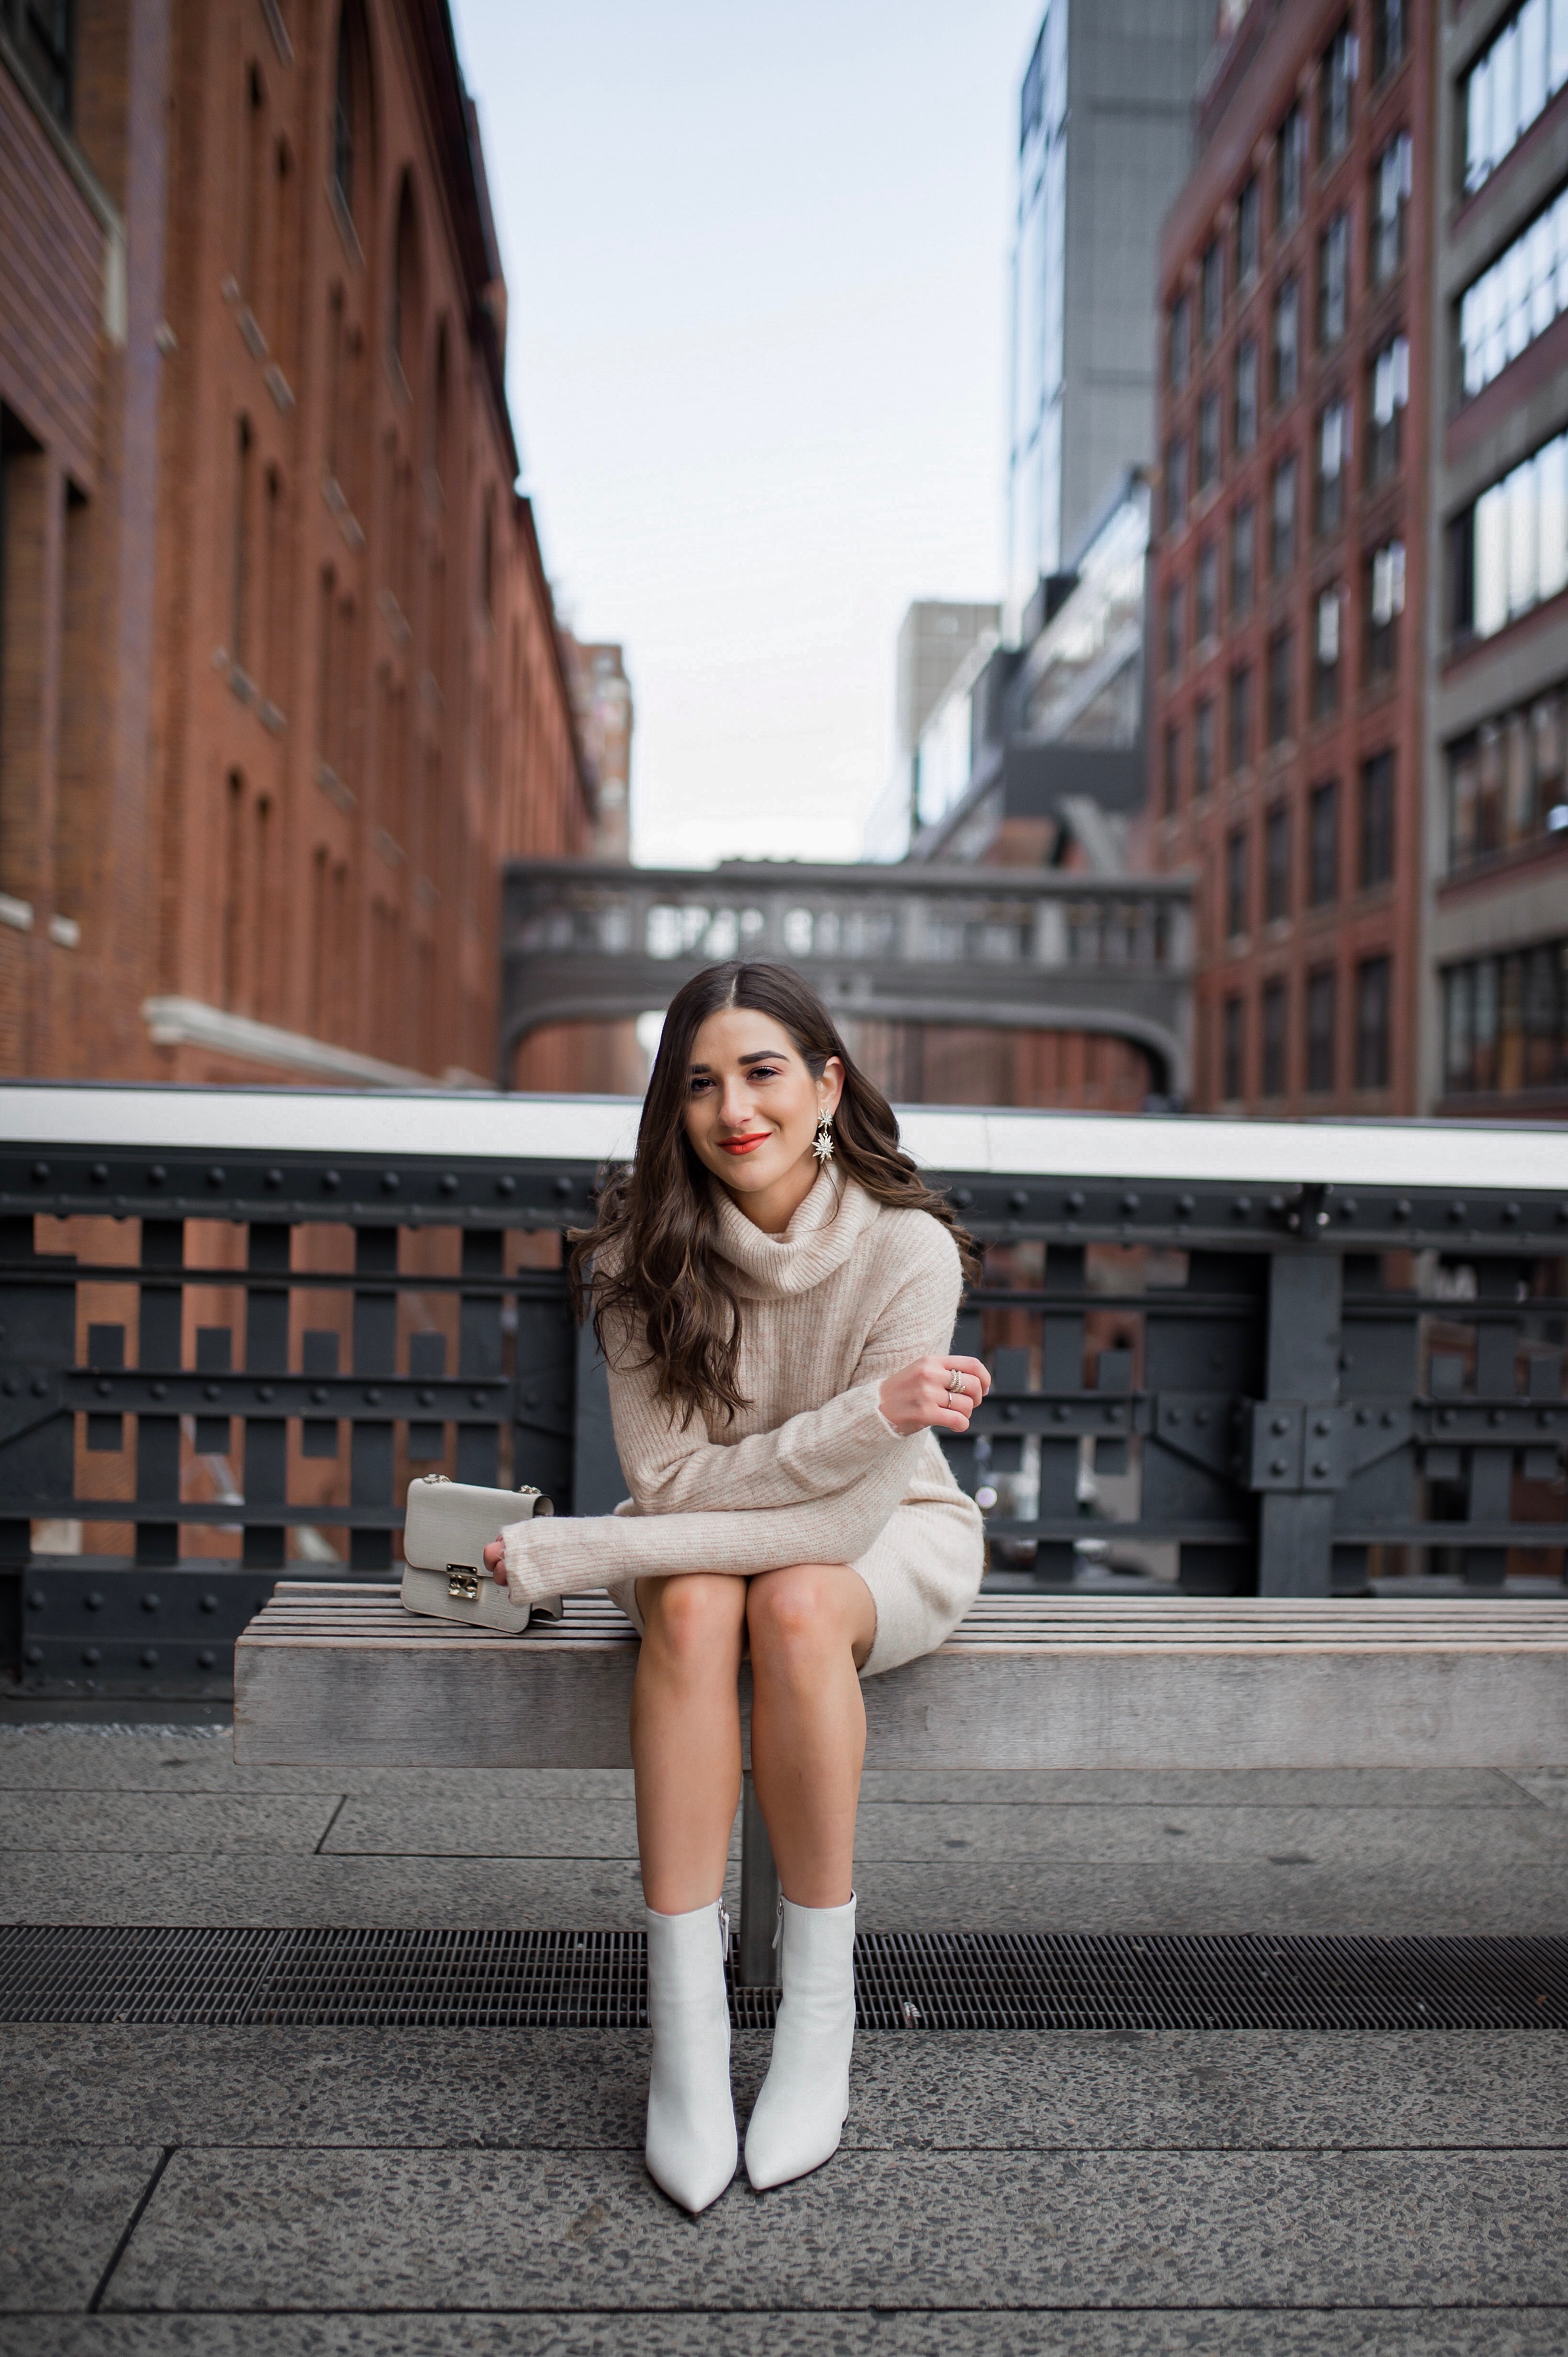 Why Blogging Is Far From Freeloading Beige Sweater Dress White Booties Esther Santer Fashion Blog NYC Street Style Blogger Outfit OOTD Trendy Shopping Leopard Belt Neutral Winter How To Wear Shop Sale Mango Jcrew The High Line Photoshoot  Inspiration.jpg